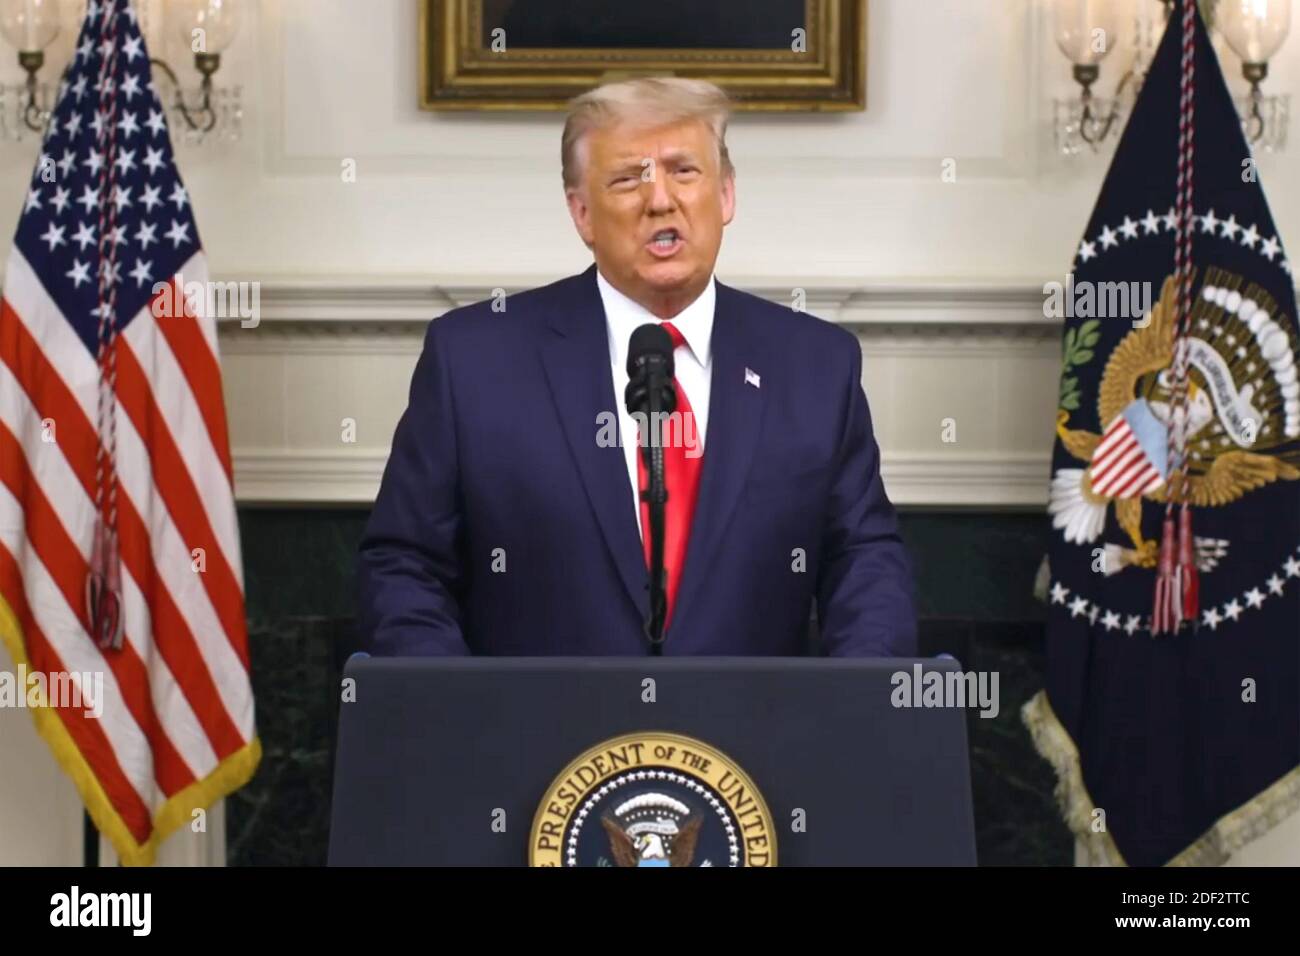 Washington DC, USA. 2nd Dec 2020. In this frame grab from Facebook, President Donald J. Trump rants about the election results in a video recorded at the White House without an audience on Wednesday, December 2, 2020. No press were allowed for the recording. Trump repeated false and unsubstantiated allegations of widespread election fraud as he continues to refuse to concede the election that he lost to President-elect Joe Biden a month ago. Credit: UPI/Alamy Live News Stock Photo